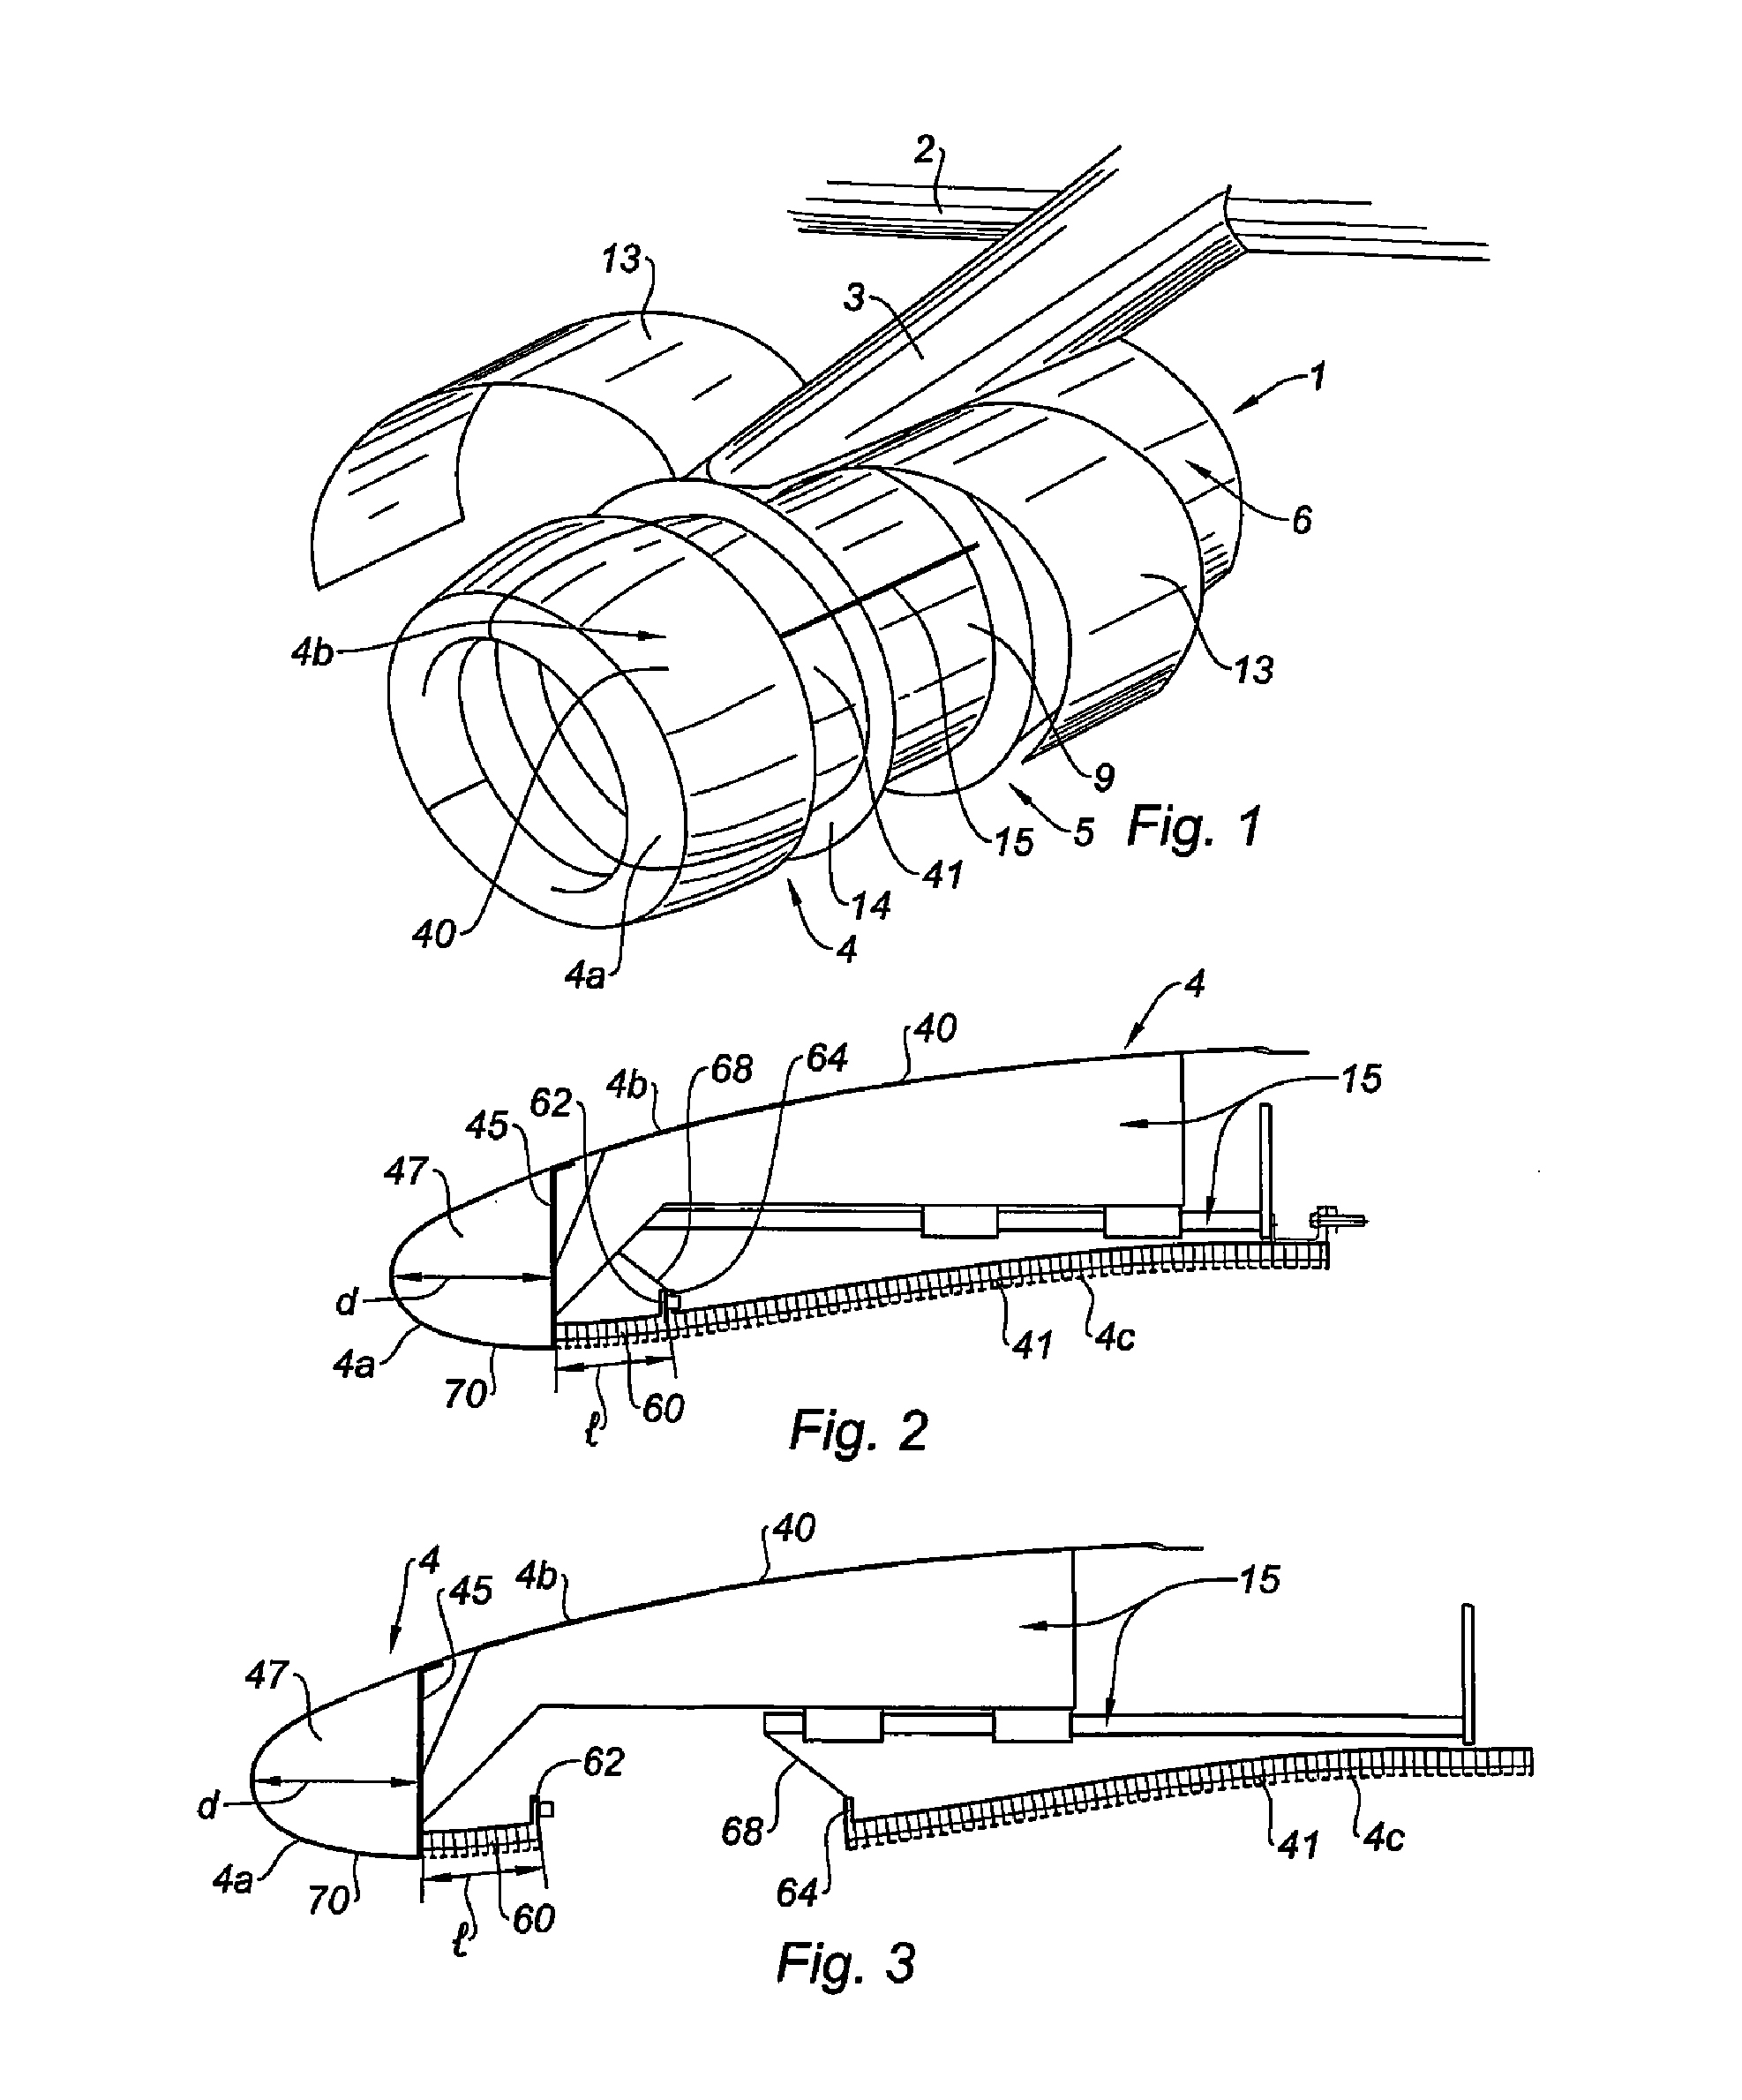 Air intake structure for a turbine engine nacelle